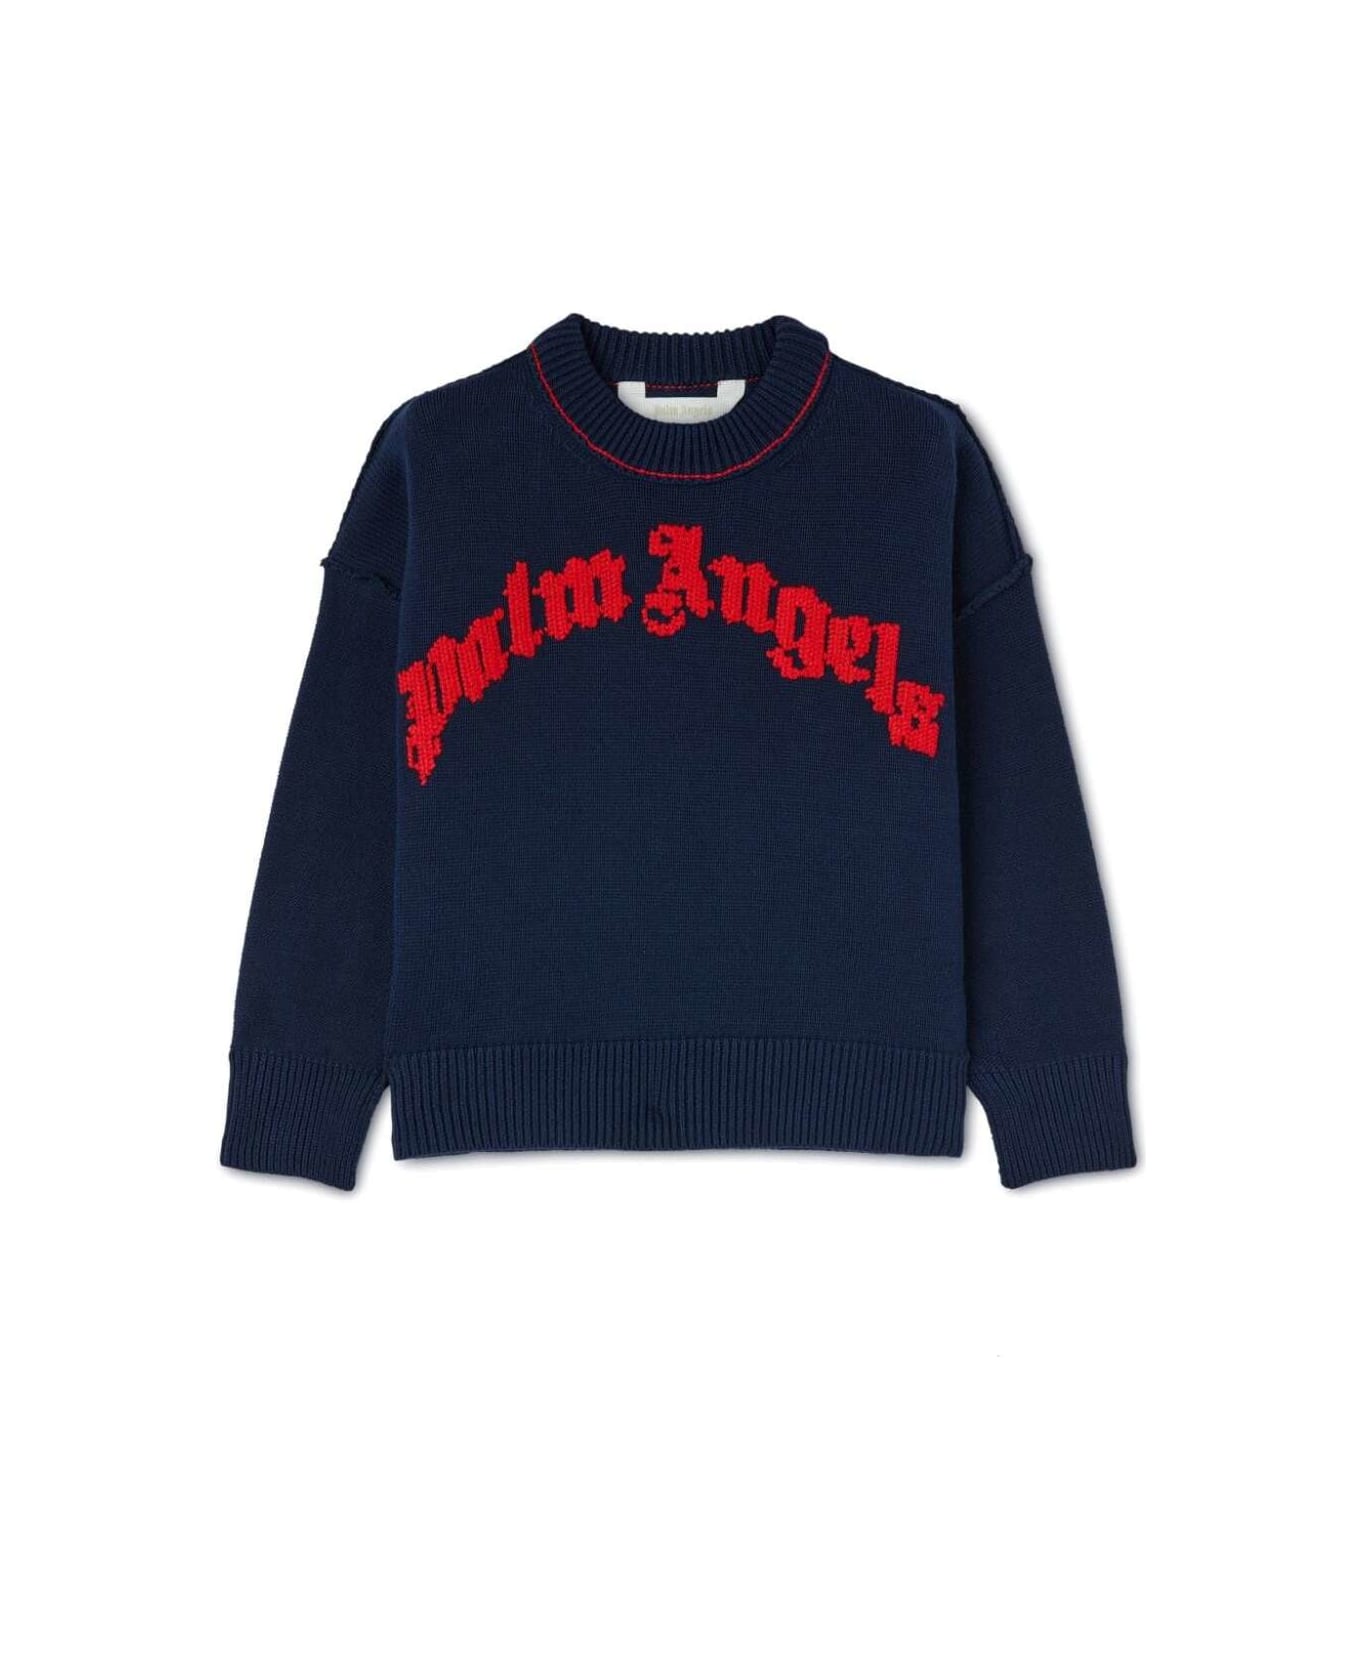 Palm Angels Curved Logo Knit Crew Navy Blue Red - Blu